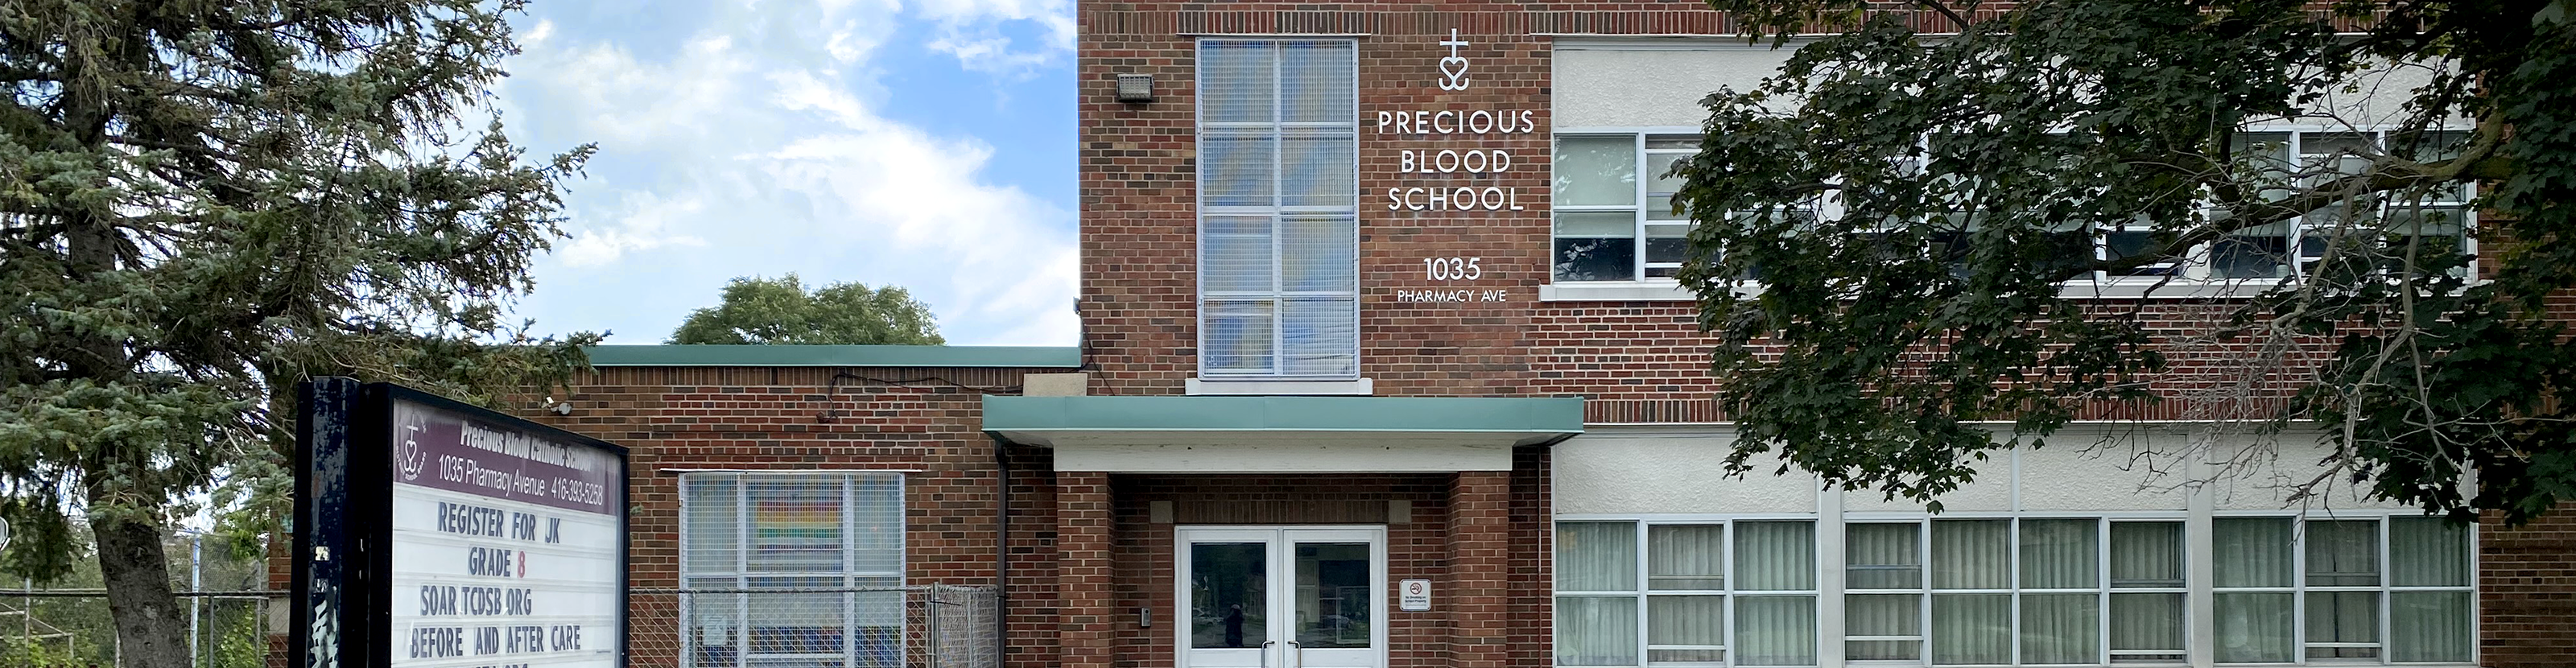 An image of the front of school building.